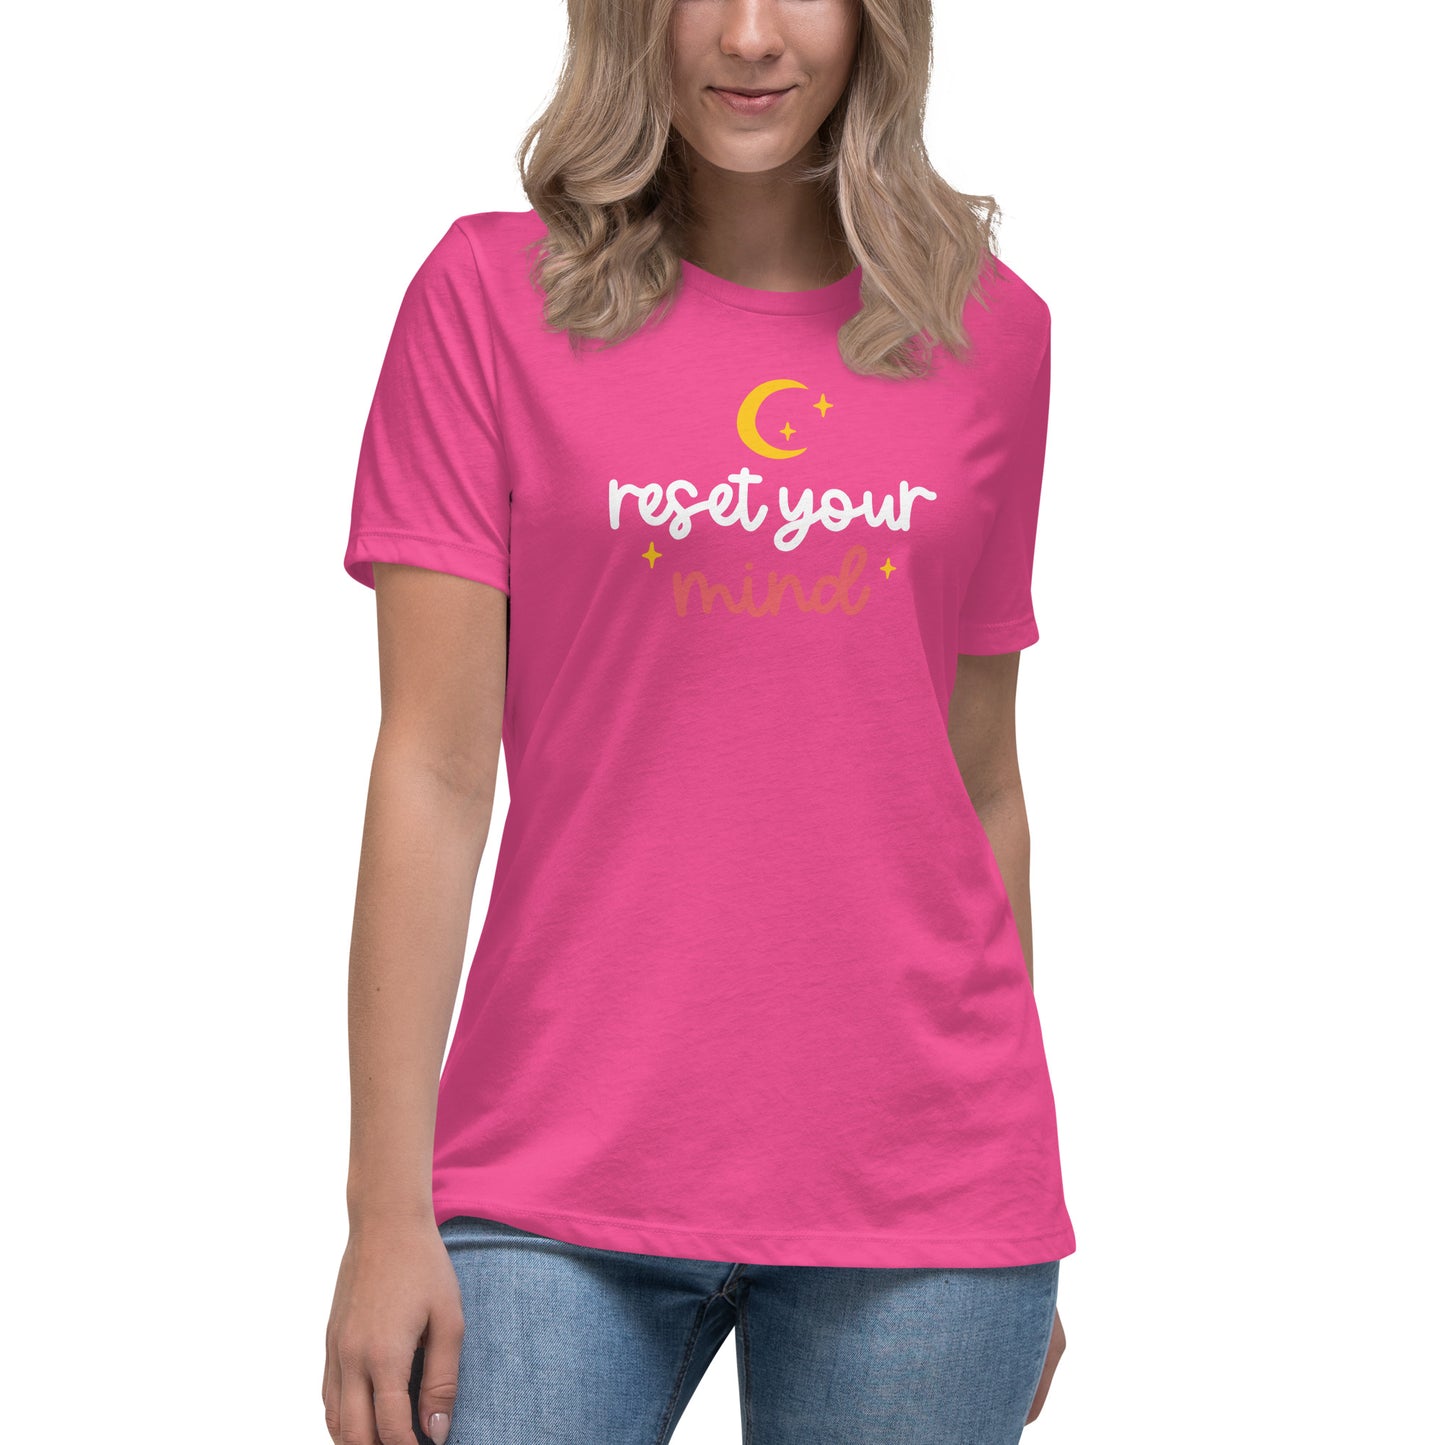 Reset Your Mind - Funny T-shirt Slogans Yoga Lover T-Shirt Collection